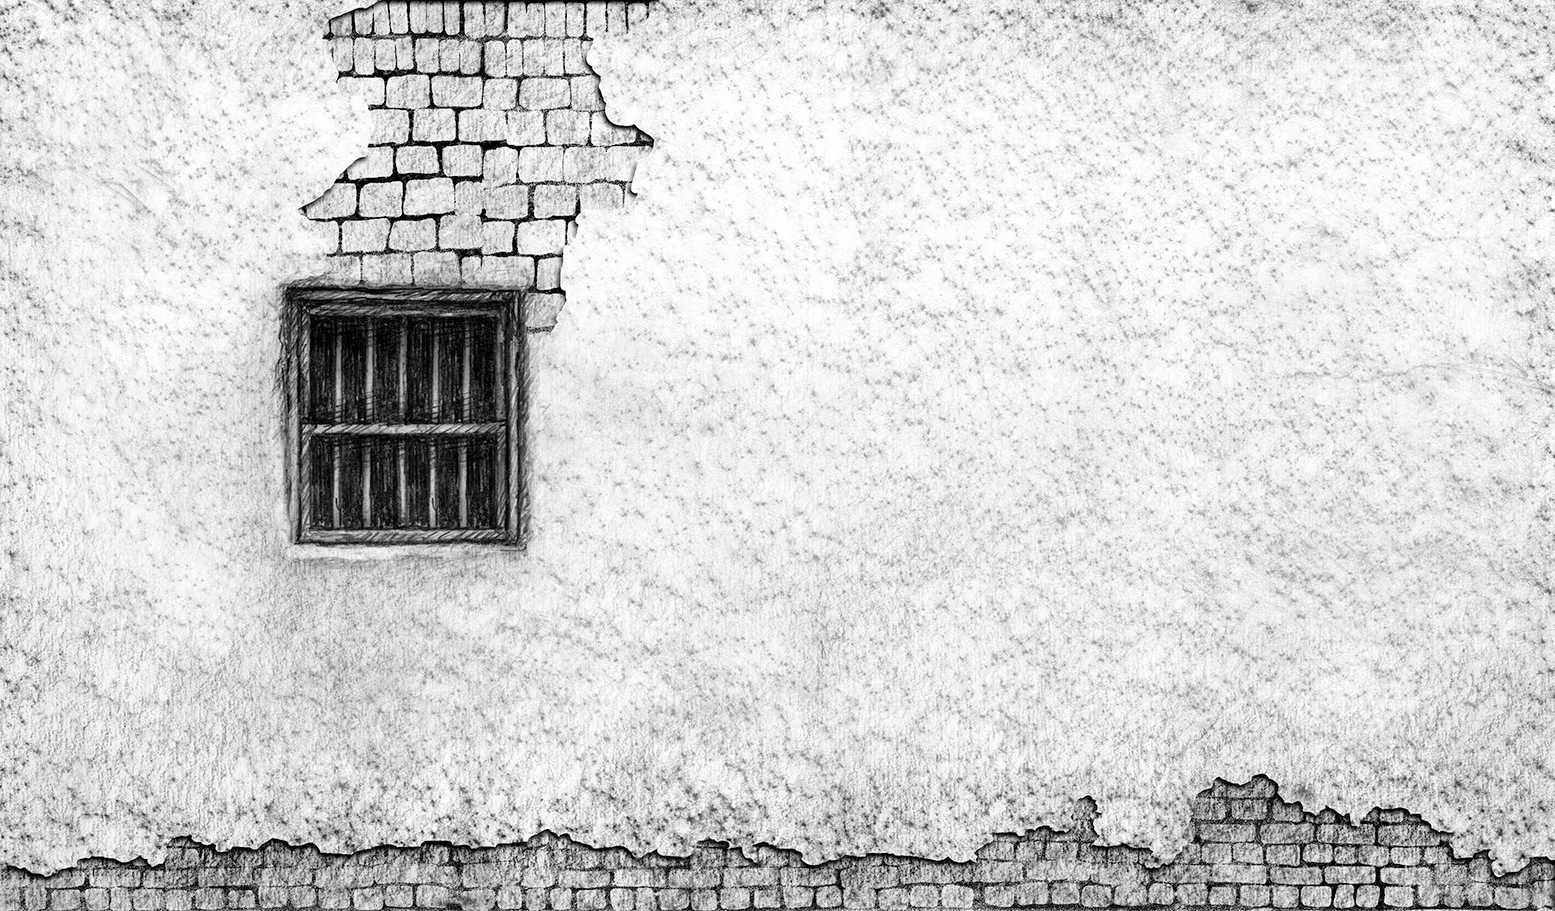 ‘Kaf El Amar’ – Film, Egypt  2011.

Wall with broken render – scanned pencil drawing processed in Photoshop.